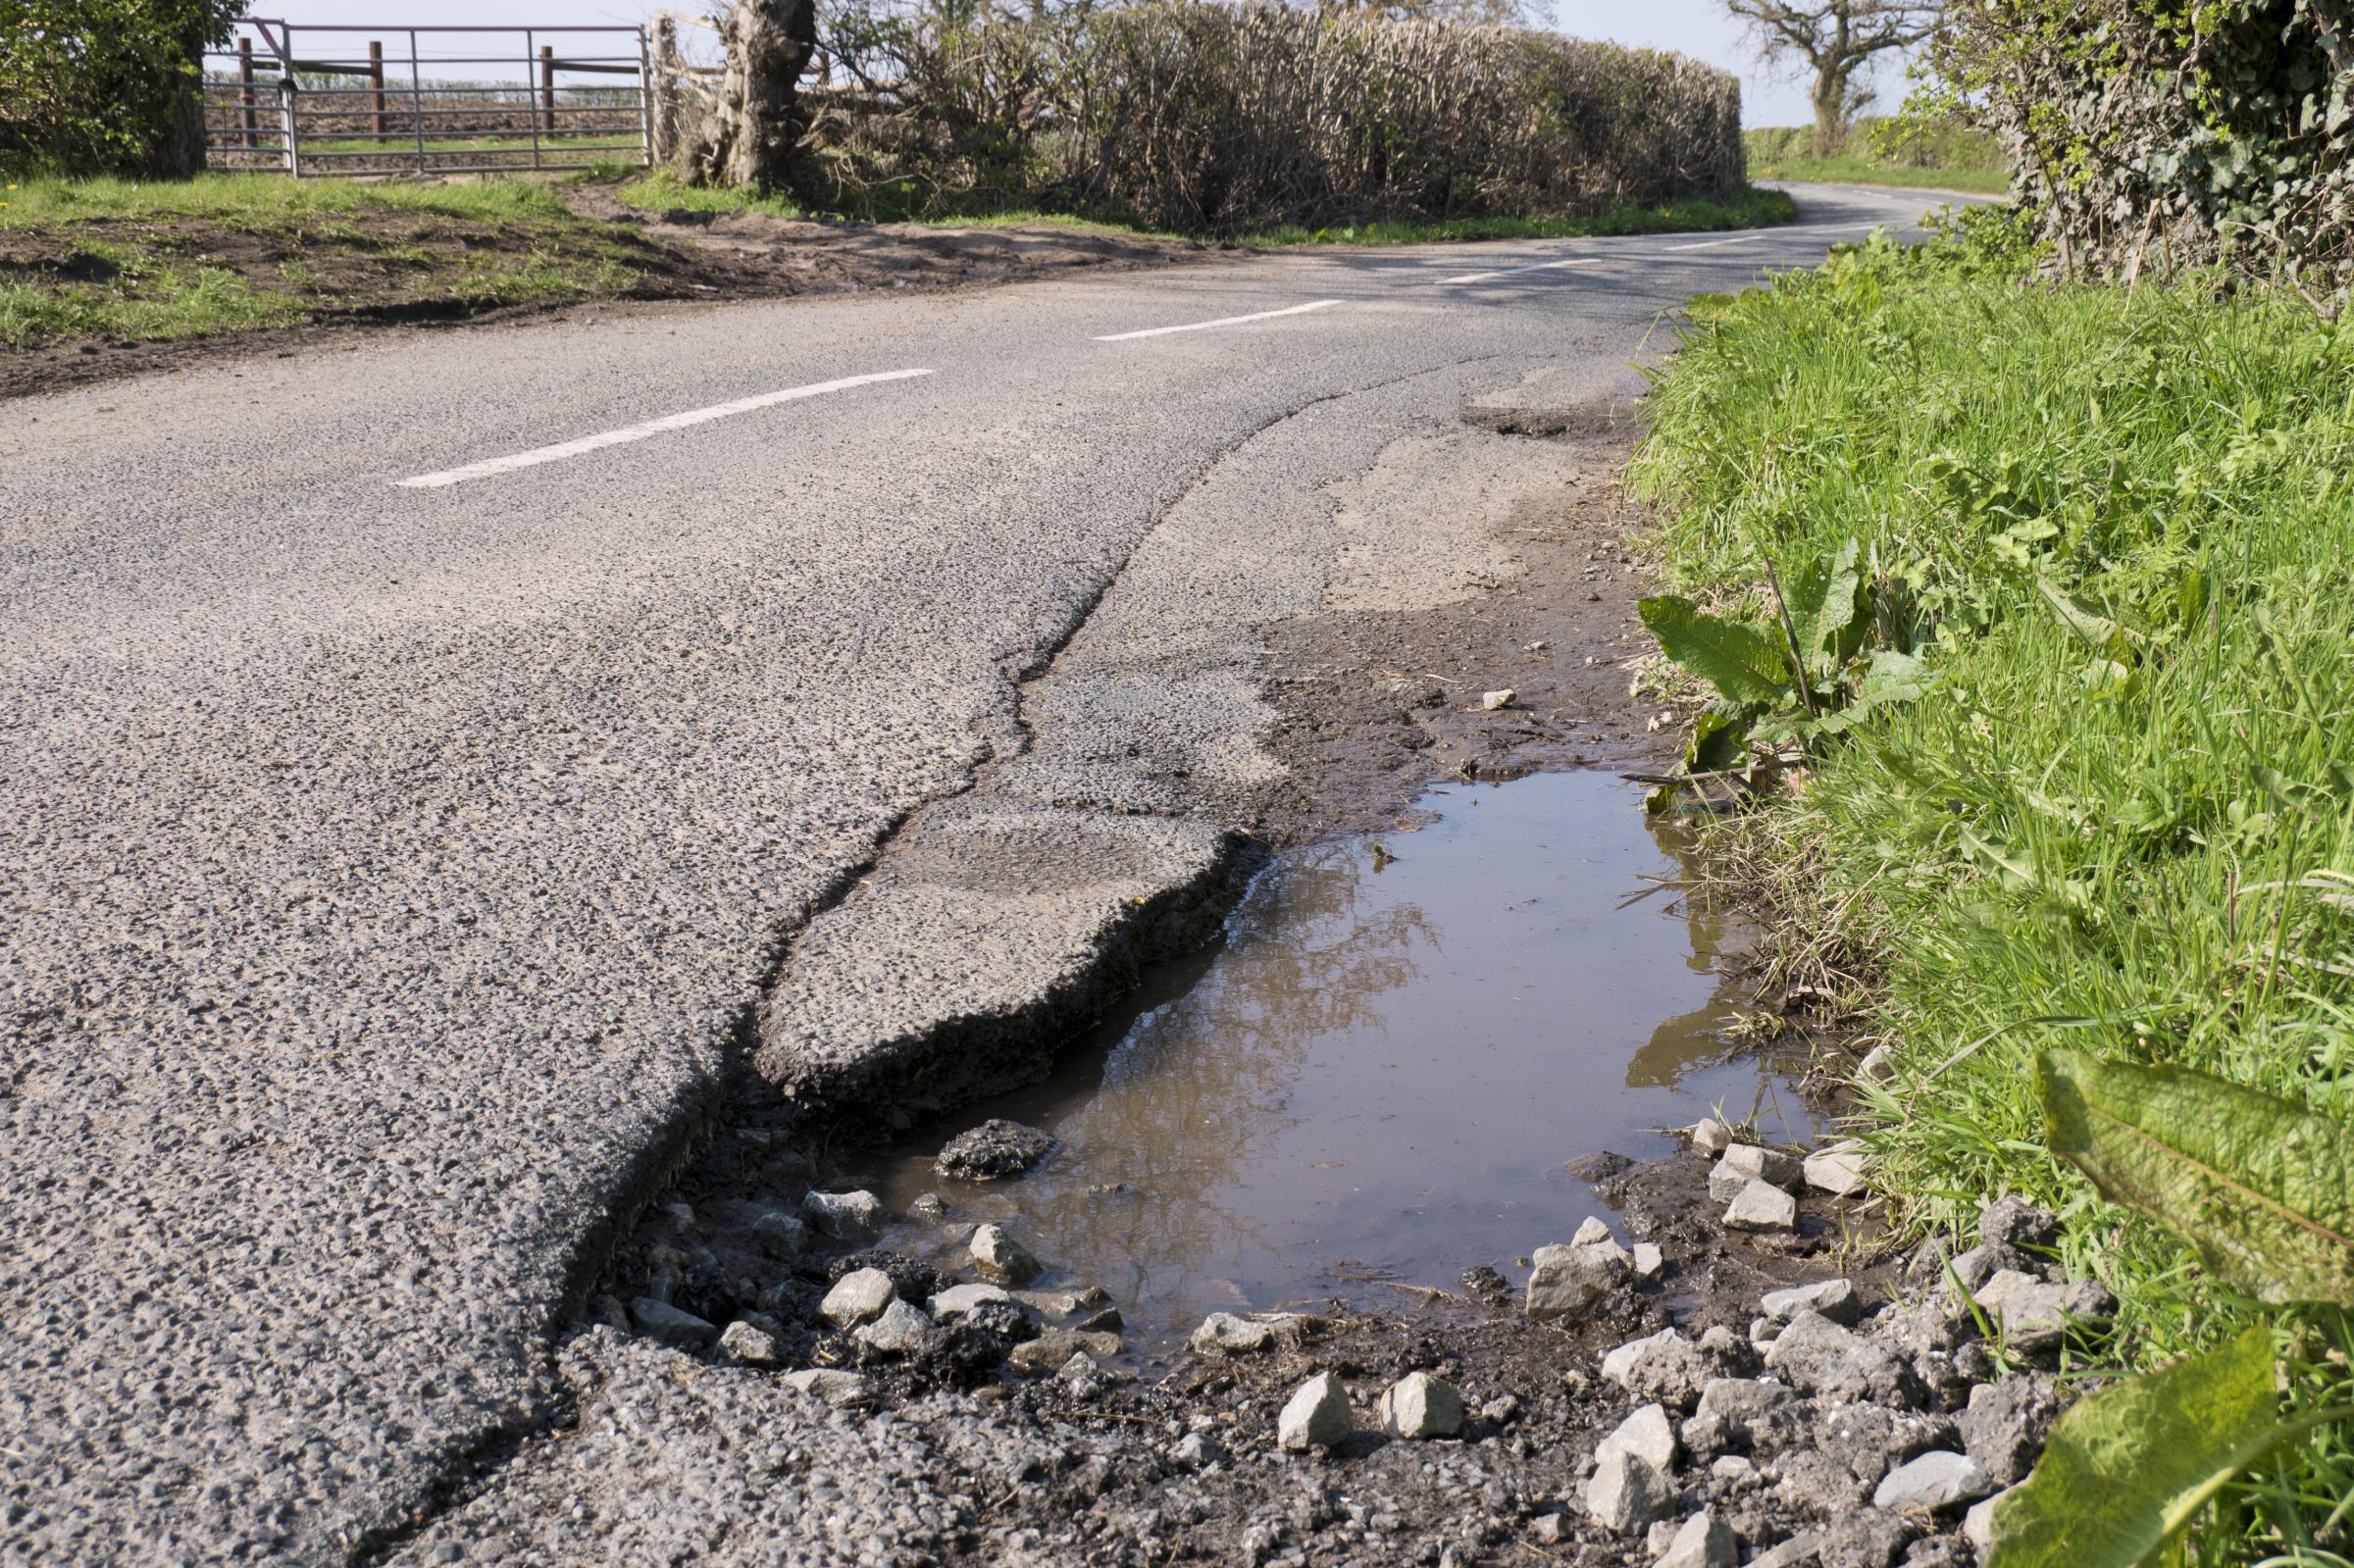 Unrepaired pothole - surface damage to surface on a rural road.